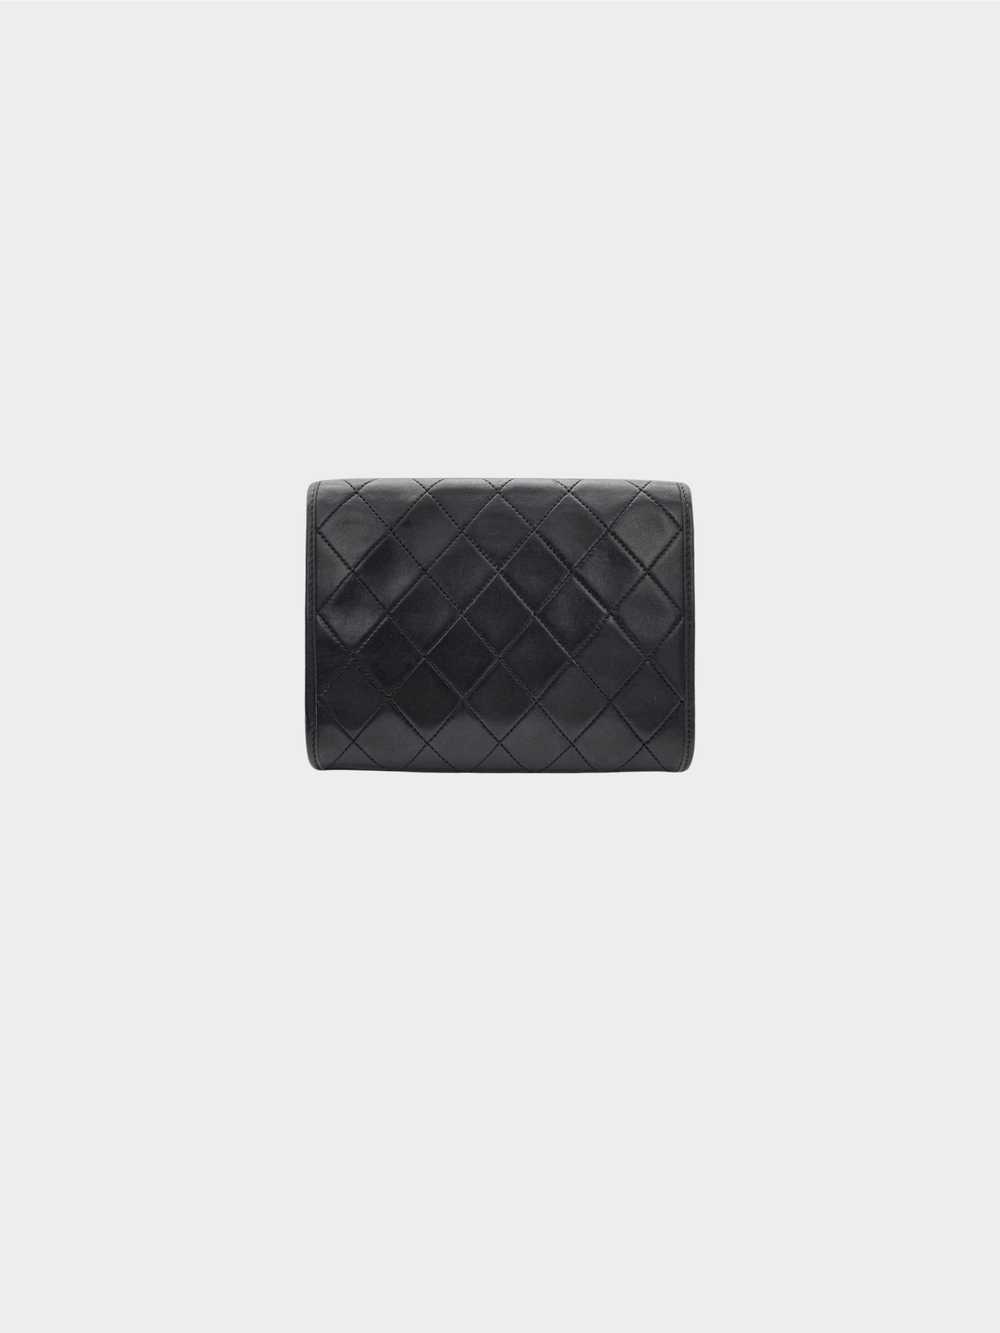 Chanel 1980s Quilted Lambskin Leather Bag - image 2